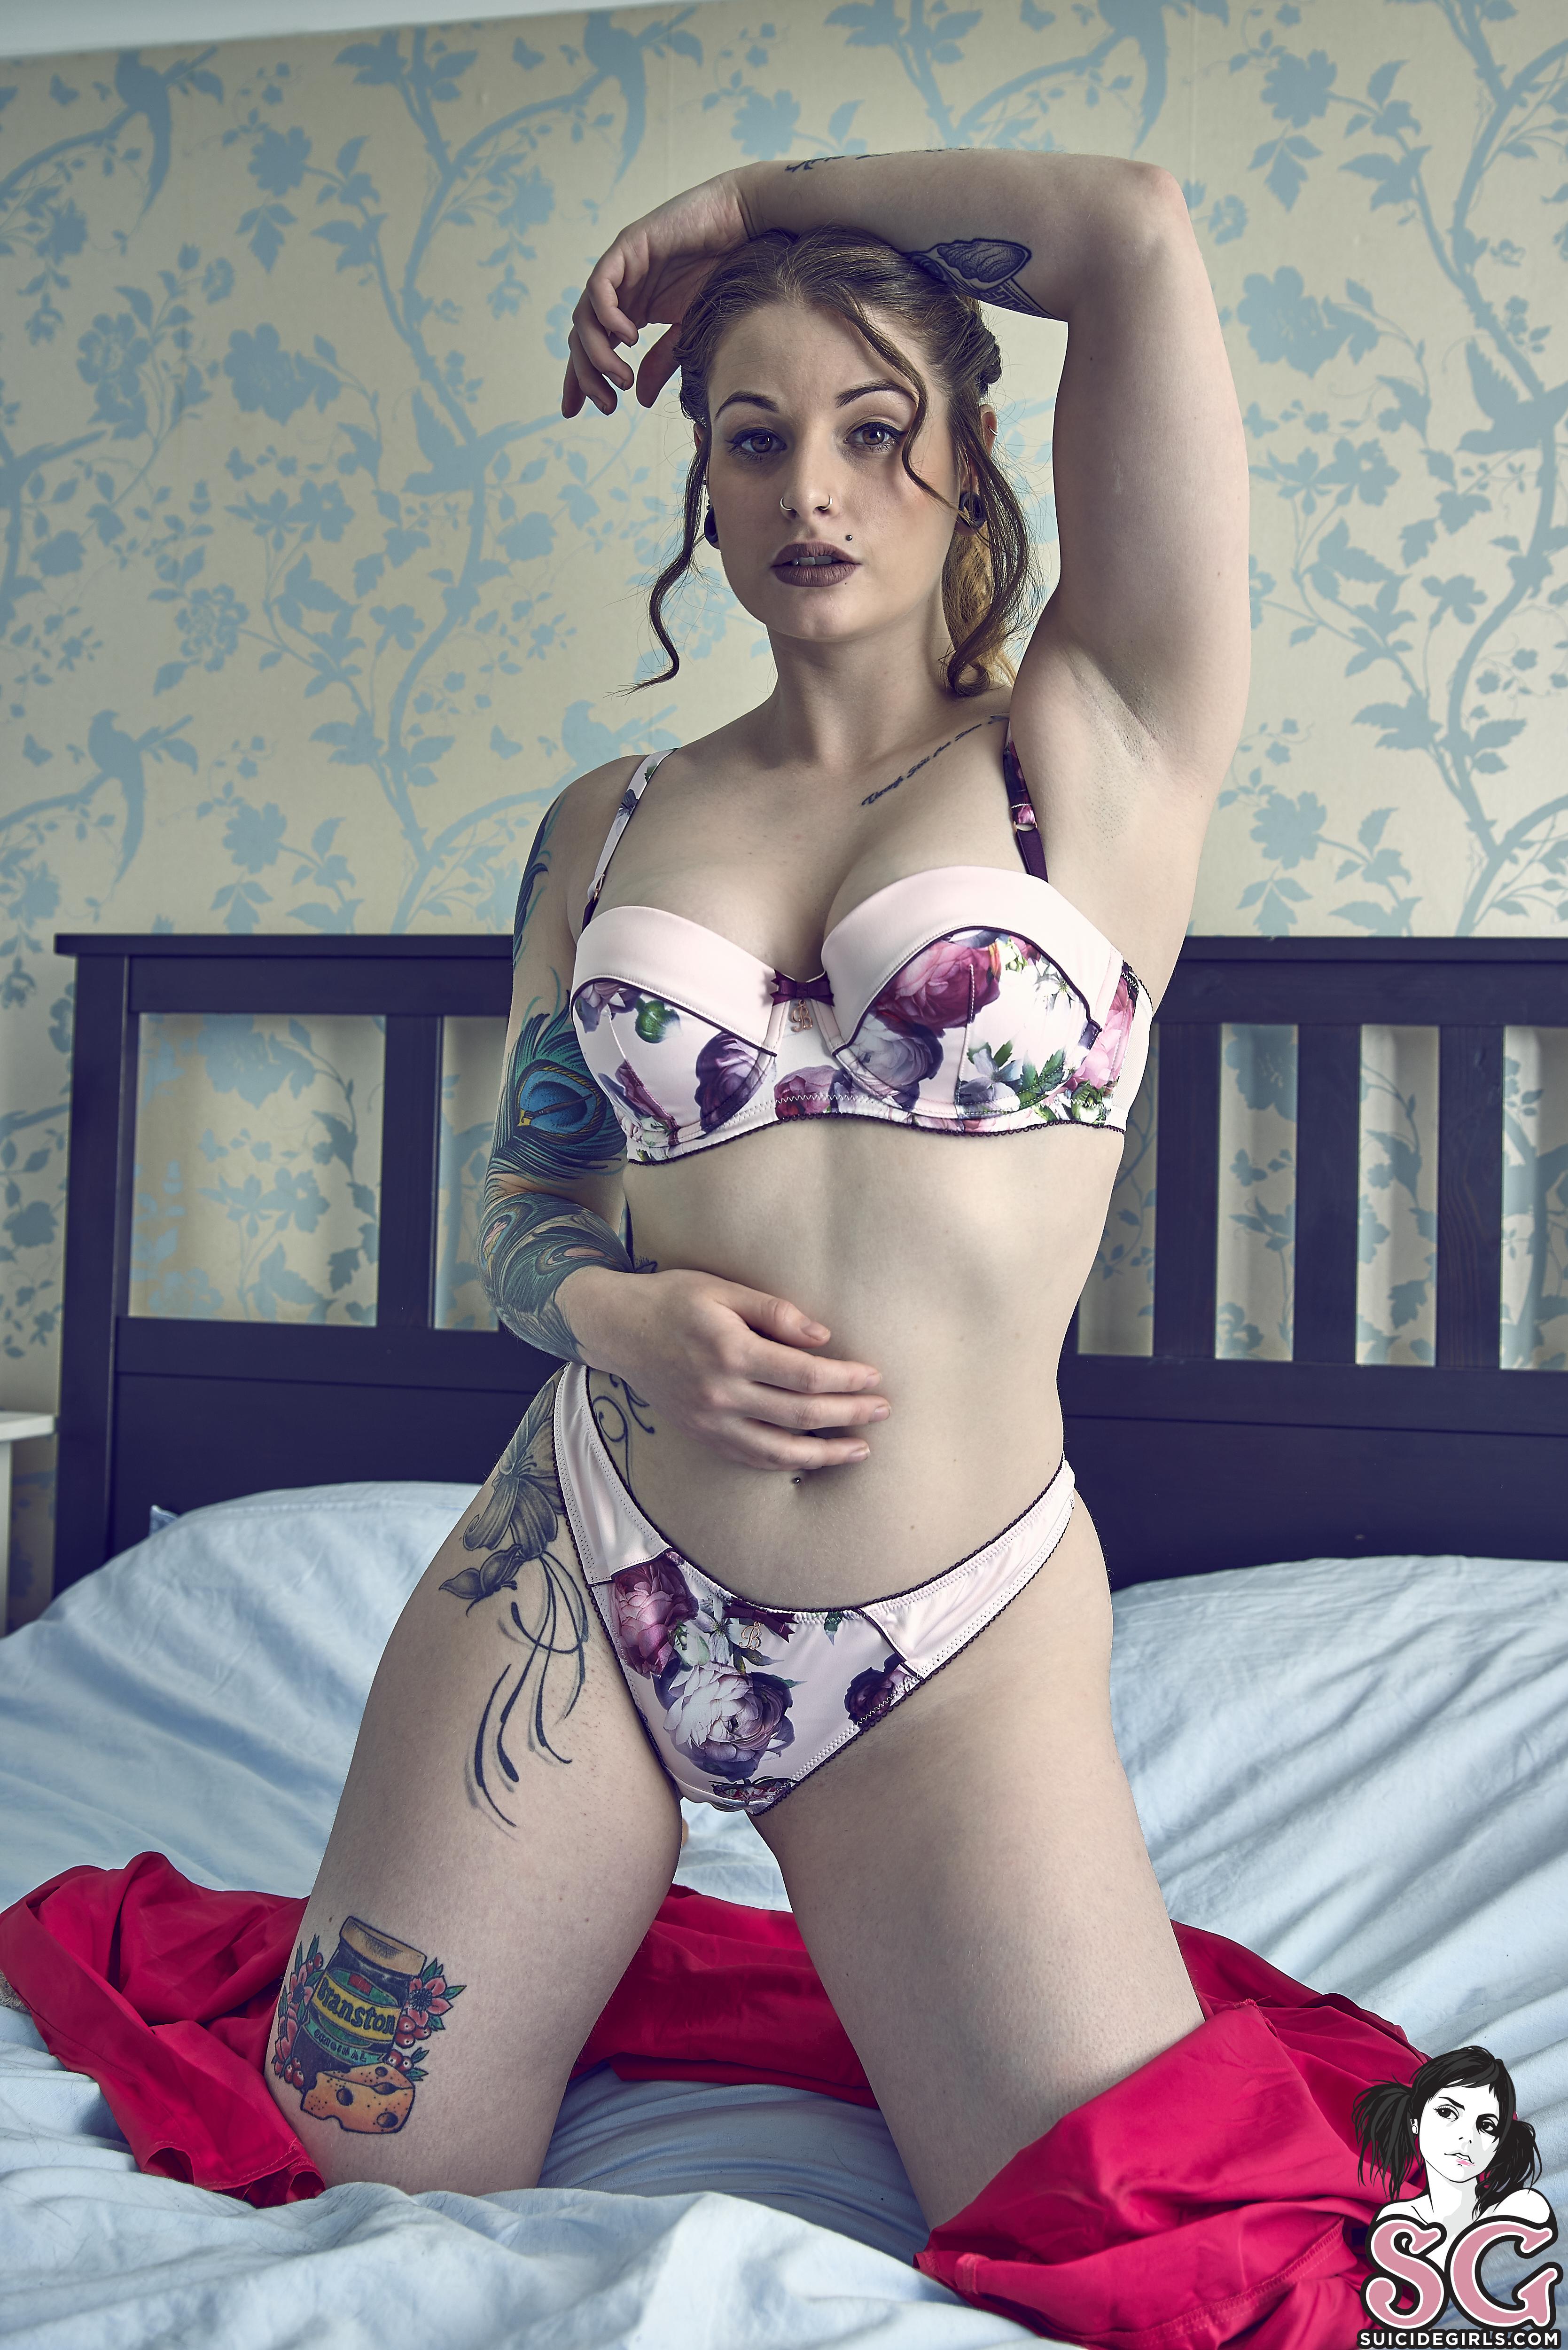 People 3337x5000 Suicide Girls tattoo in bed pillow Rebeccalotus women portrait display watermarked